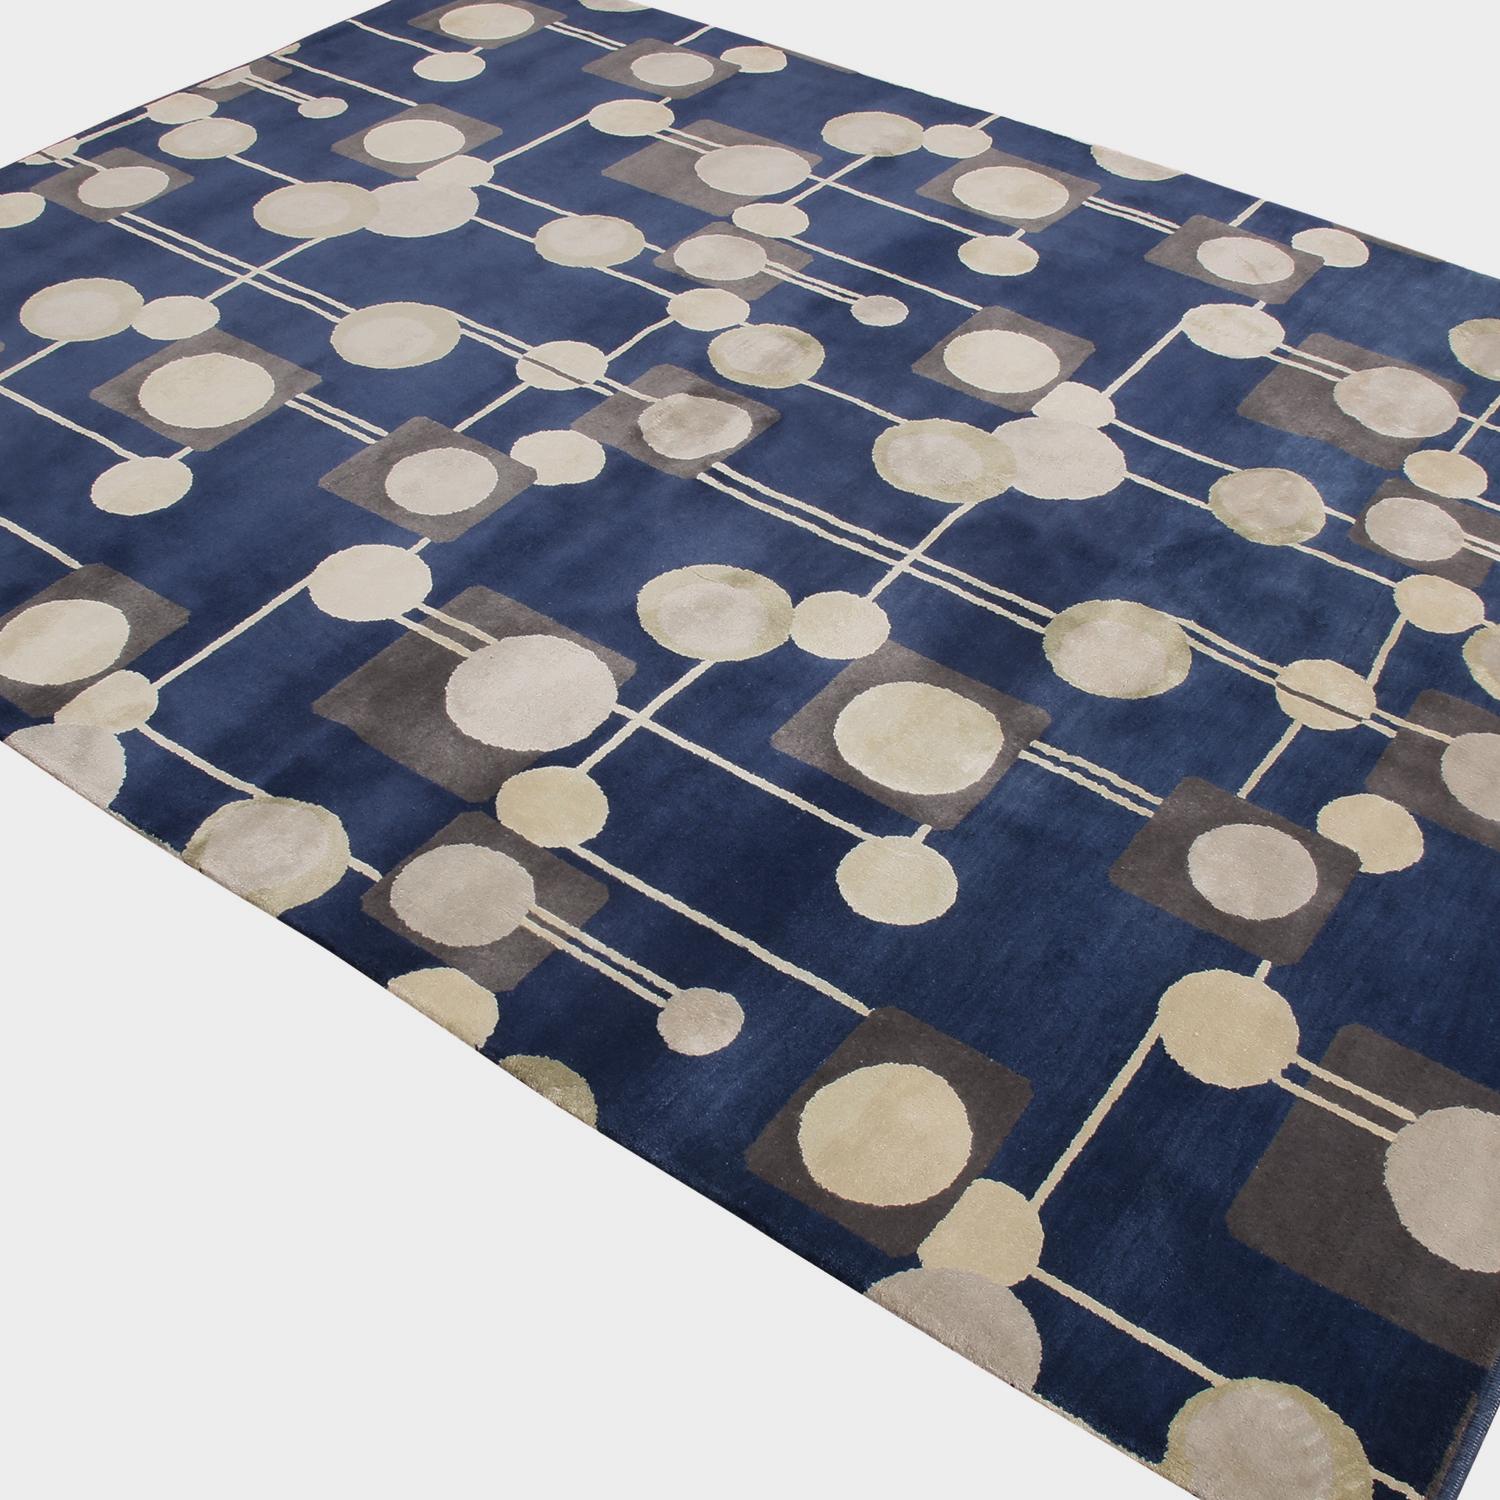 Made in hand knotted wool, natural silk and exotic yarns unique to our team, this geometric rug joins the latest additions to Rug & Kilim’s Mid-Century Modern Collection, a bold custom-capable line recapturing an underrepresented, iconic period with